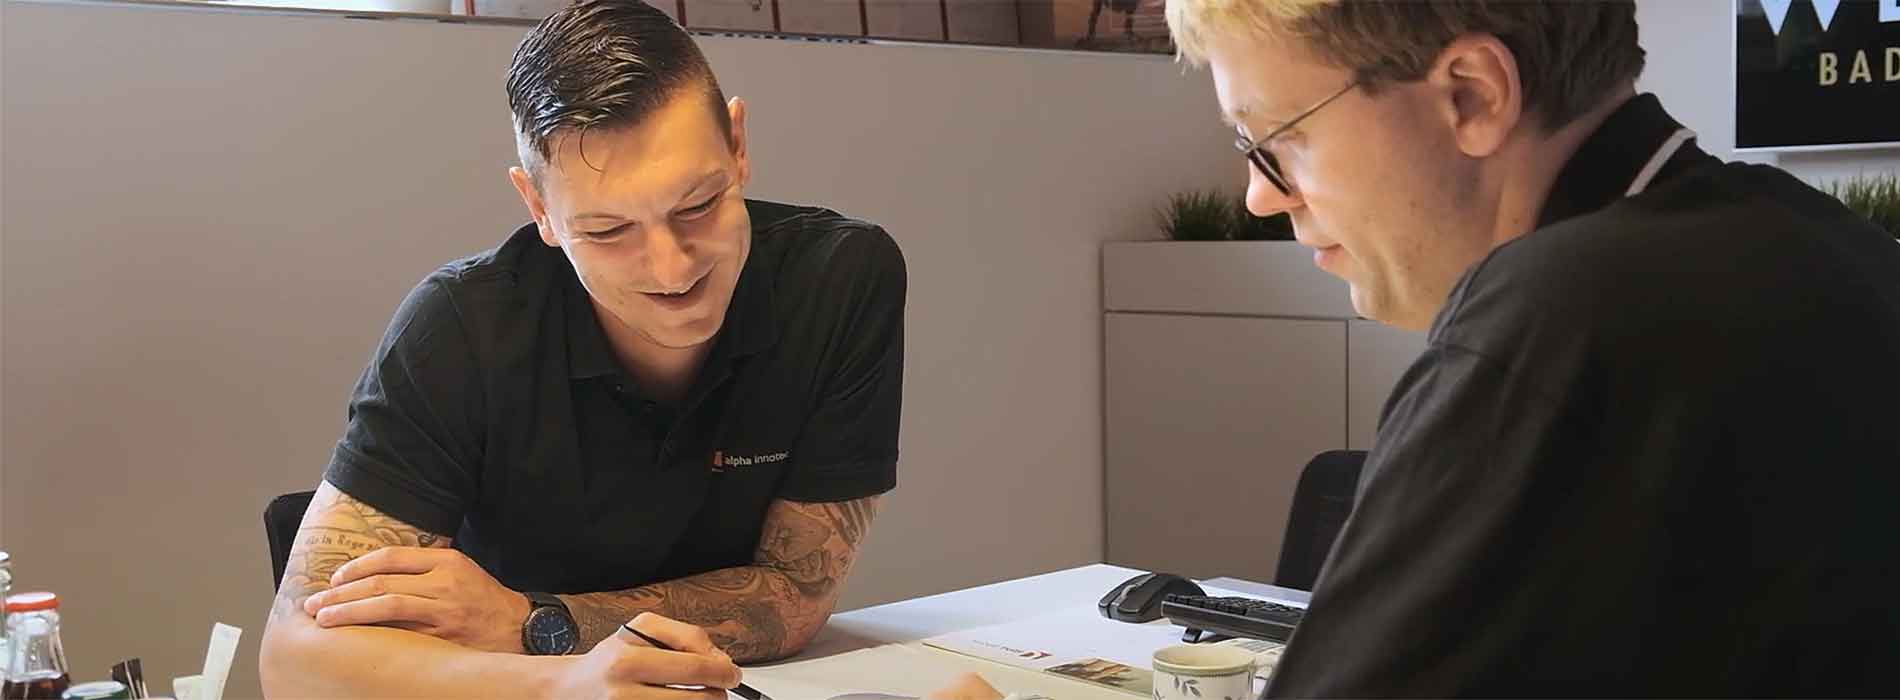 A man with tattoos on his arm explains something to a customer at the table. With a pen, he points to paper sheets lying there, at which both of them are looking.